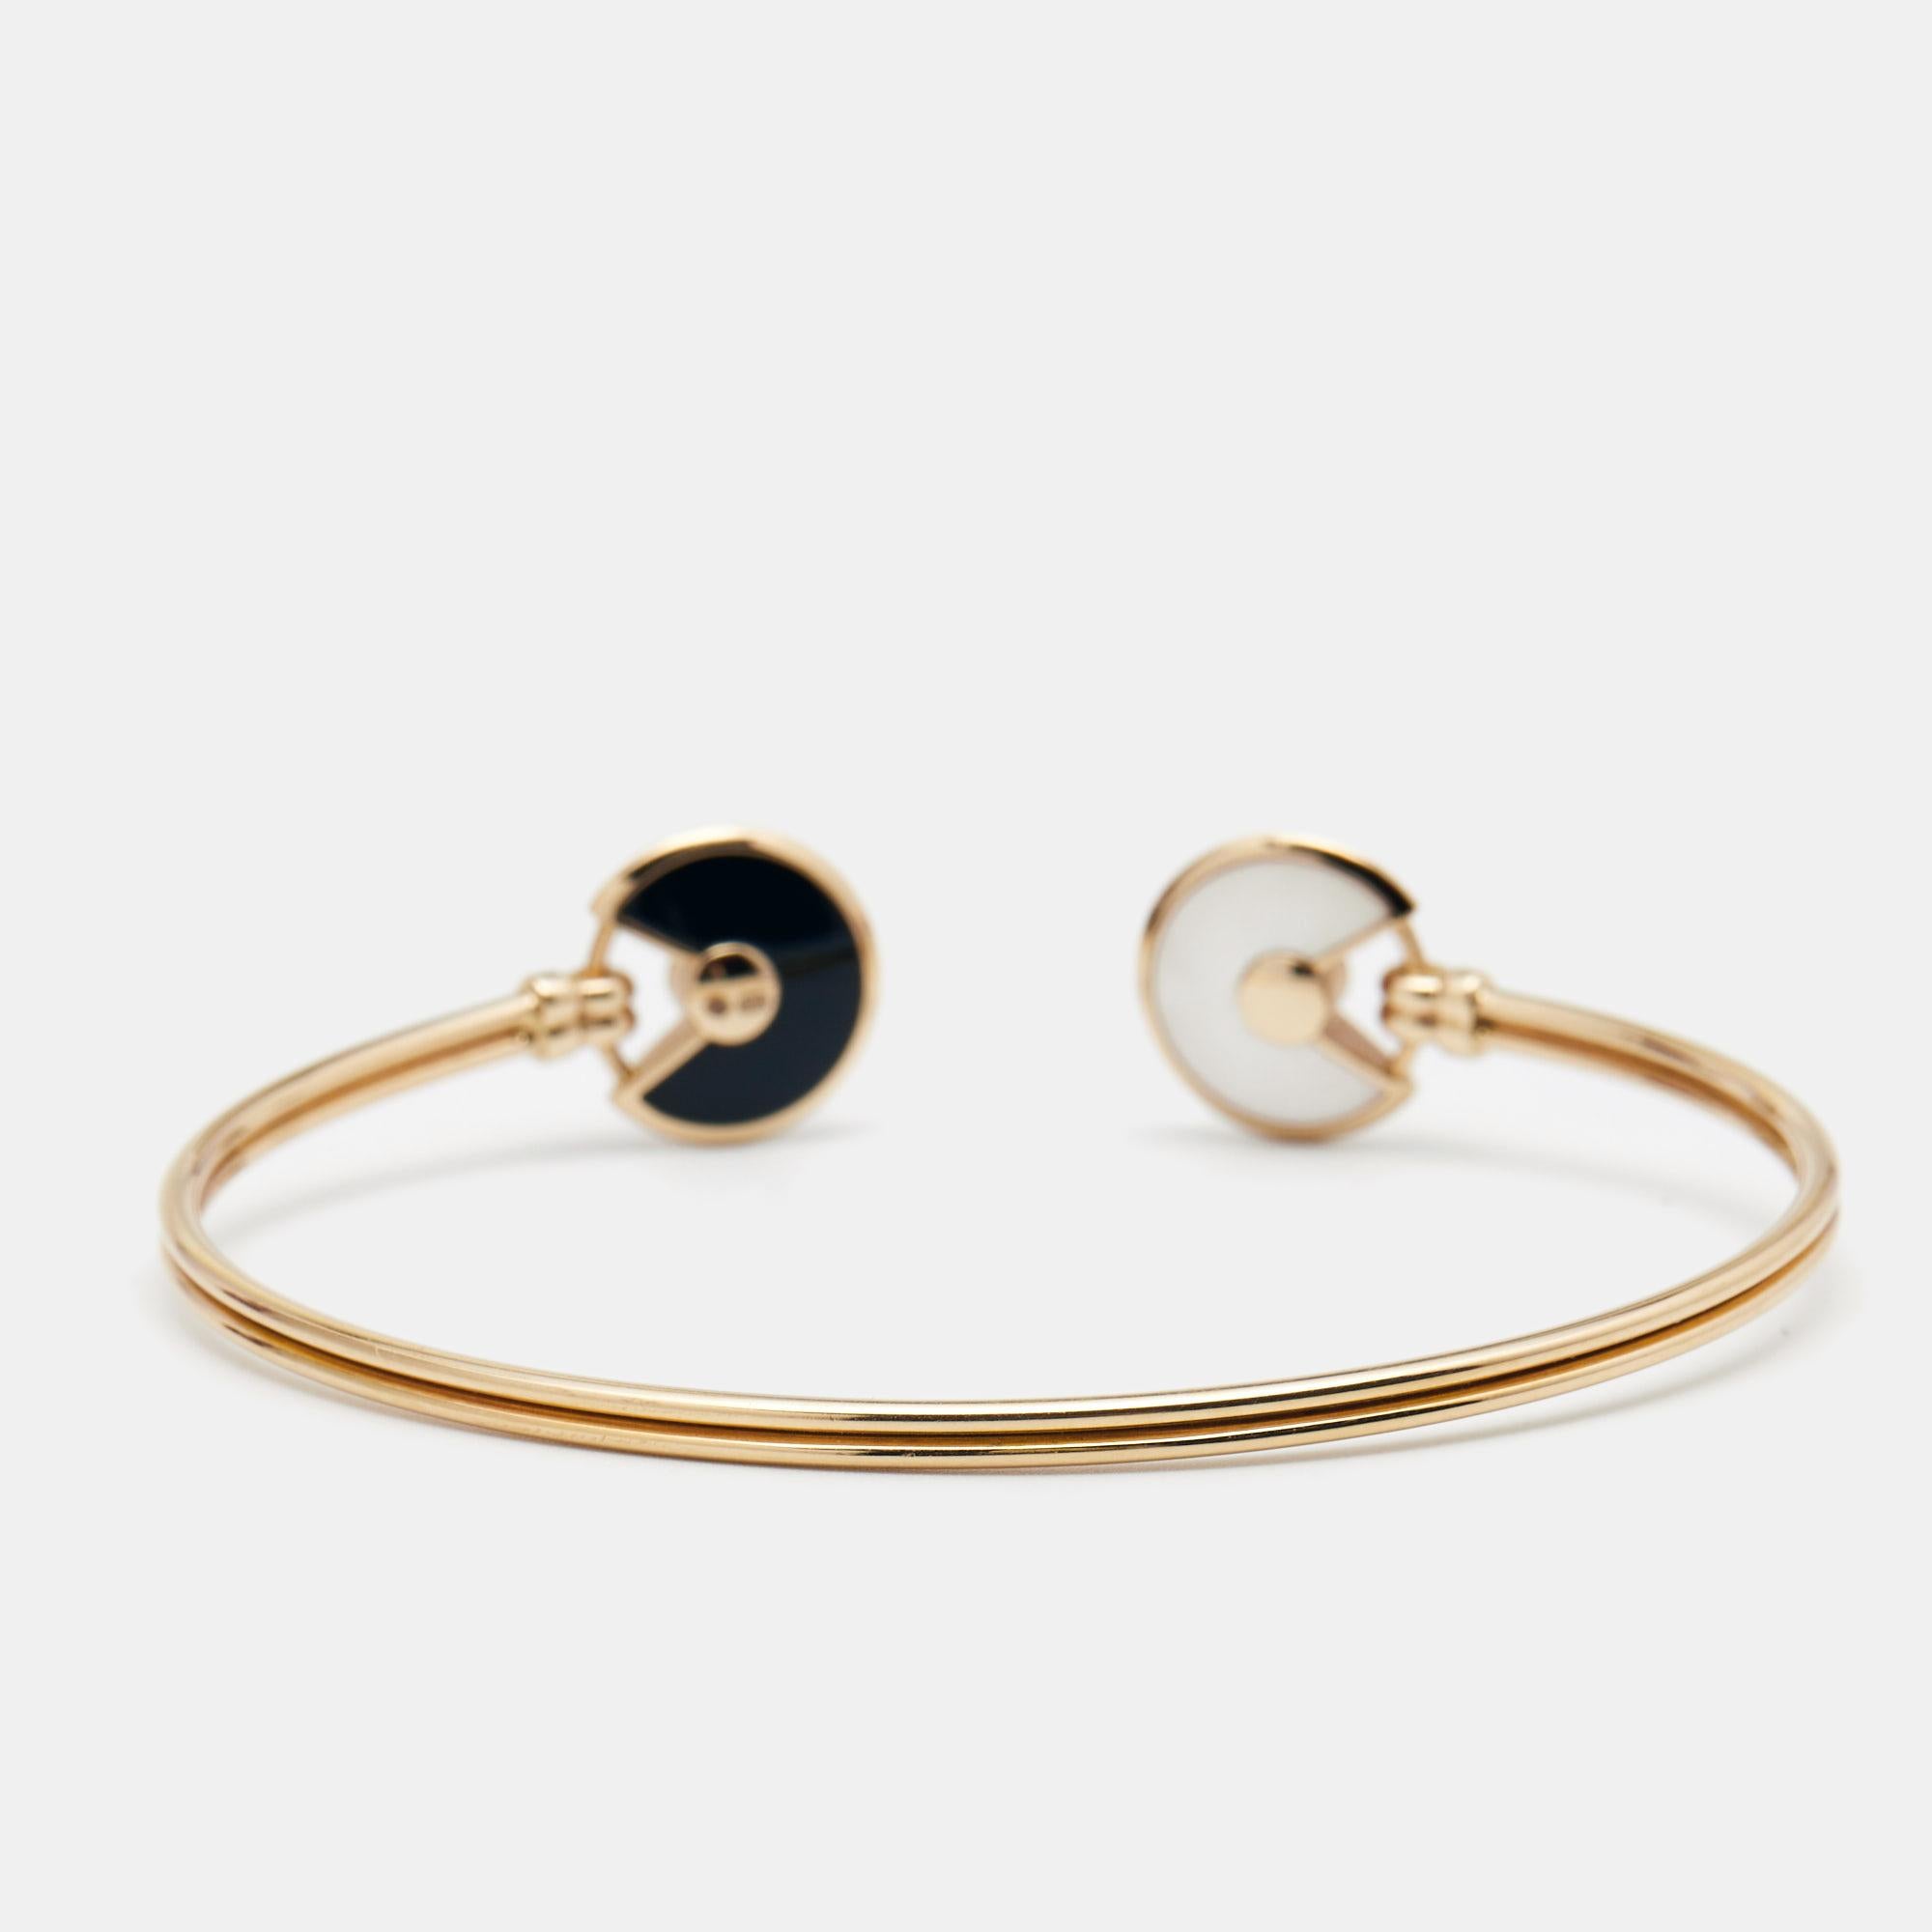 We fell in love with this Cartier bracelet at first glance. Look at its gorgeous details and picture how it will beautifully sit on your wrist. The exquisite creation is from the Amulette de Cartier collection. It is crafted from 18K rose gold in an